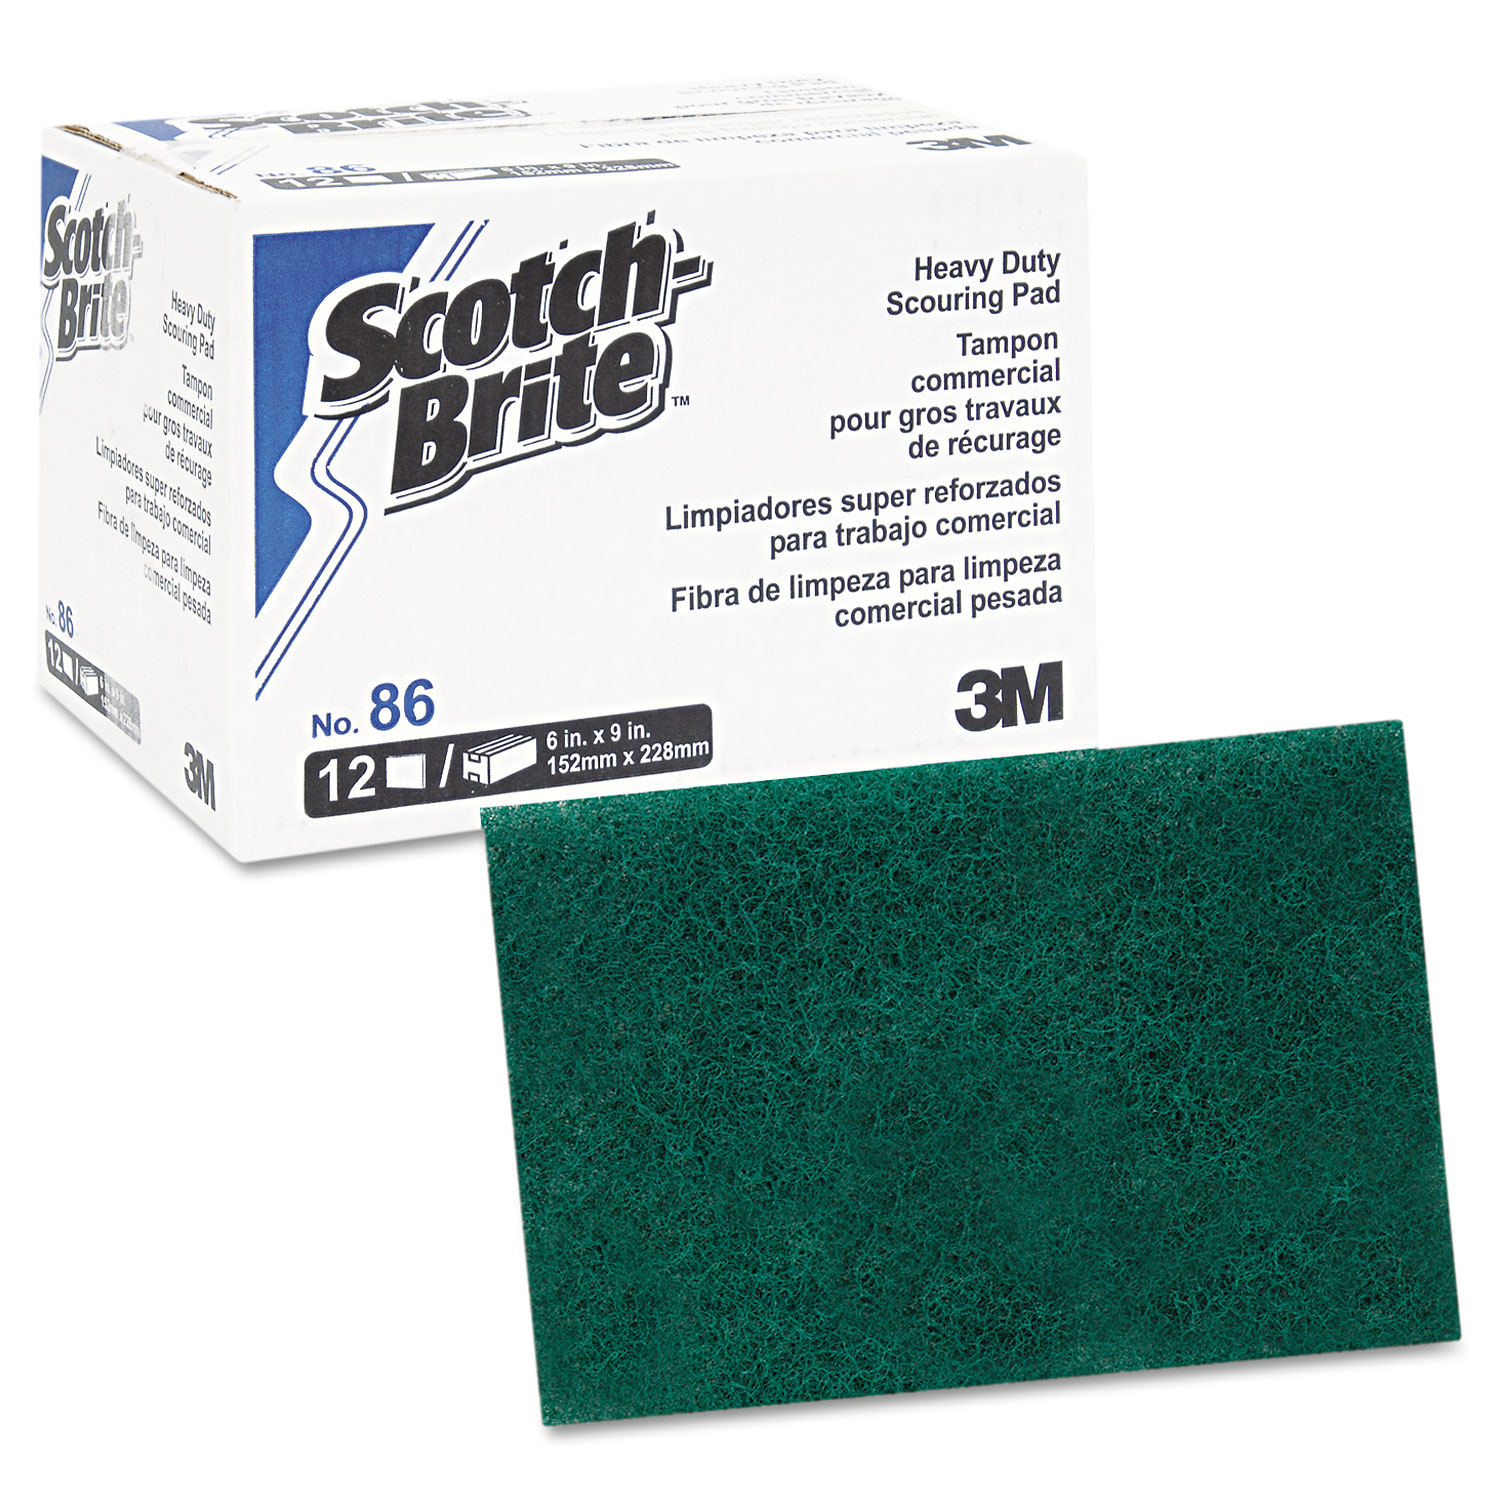 Commercial Heavy Duty Scouring Pad 86, 6 x 9, Green, 12/Pack, 3 Packs/Carton